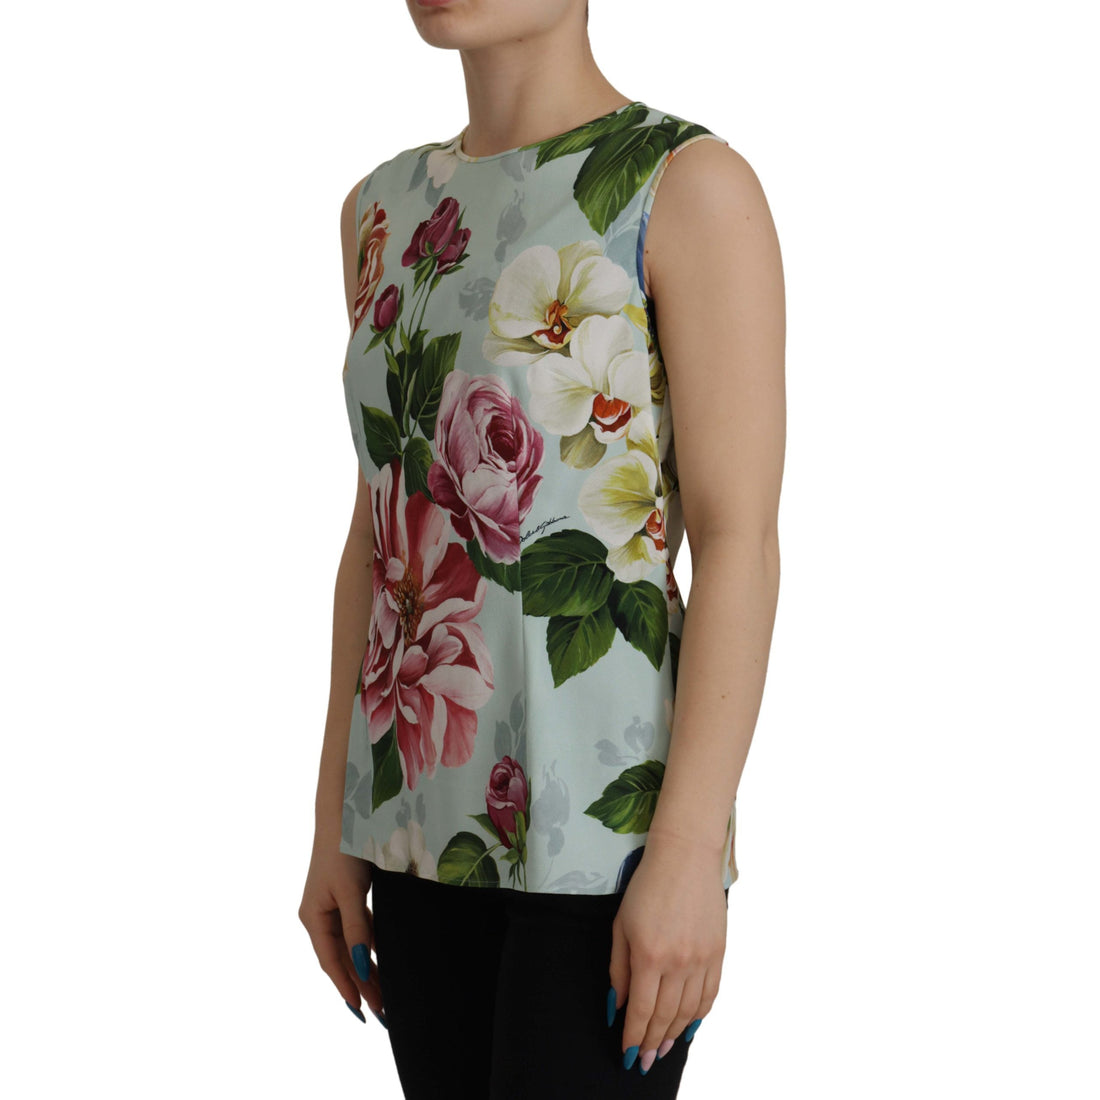 Dolce & Gabbana Chic Round Neck Sleeveless Tank with Tropical Rose Print